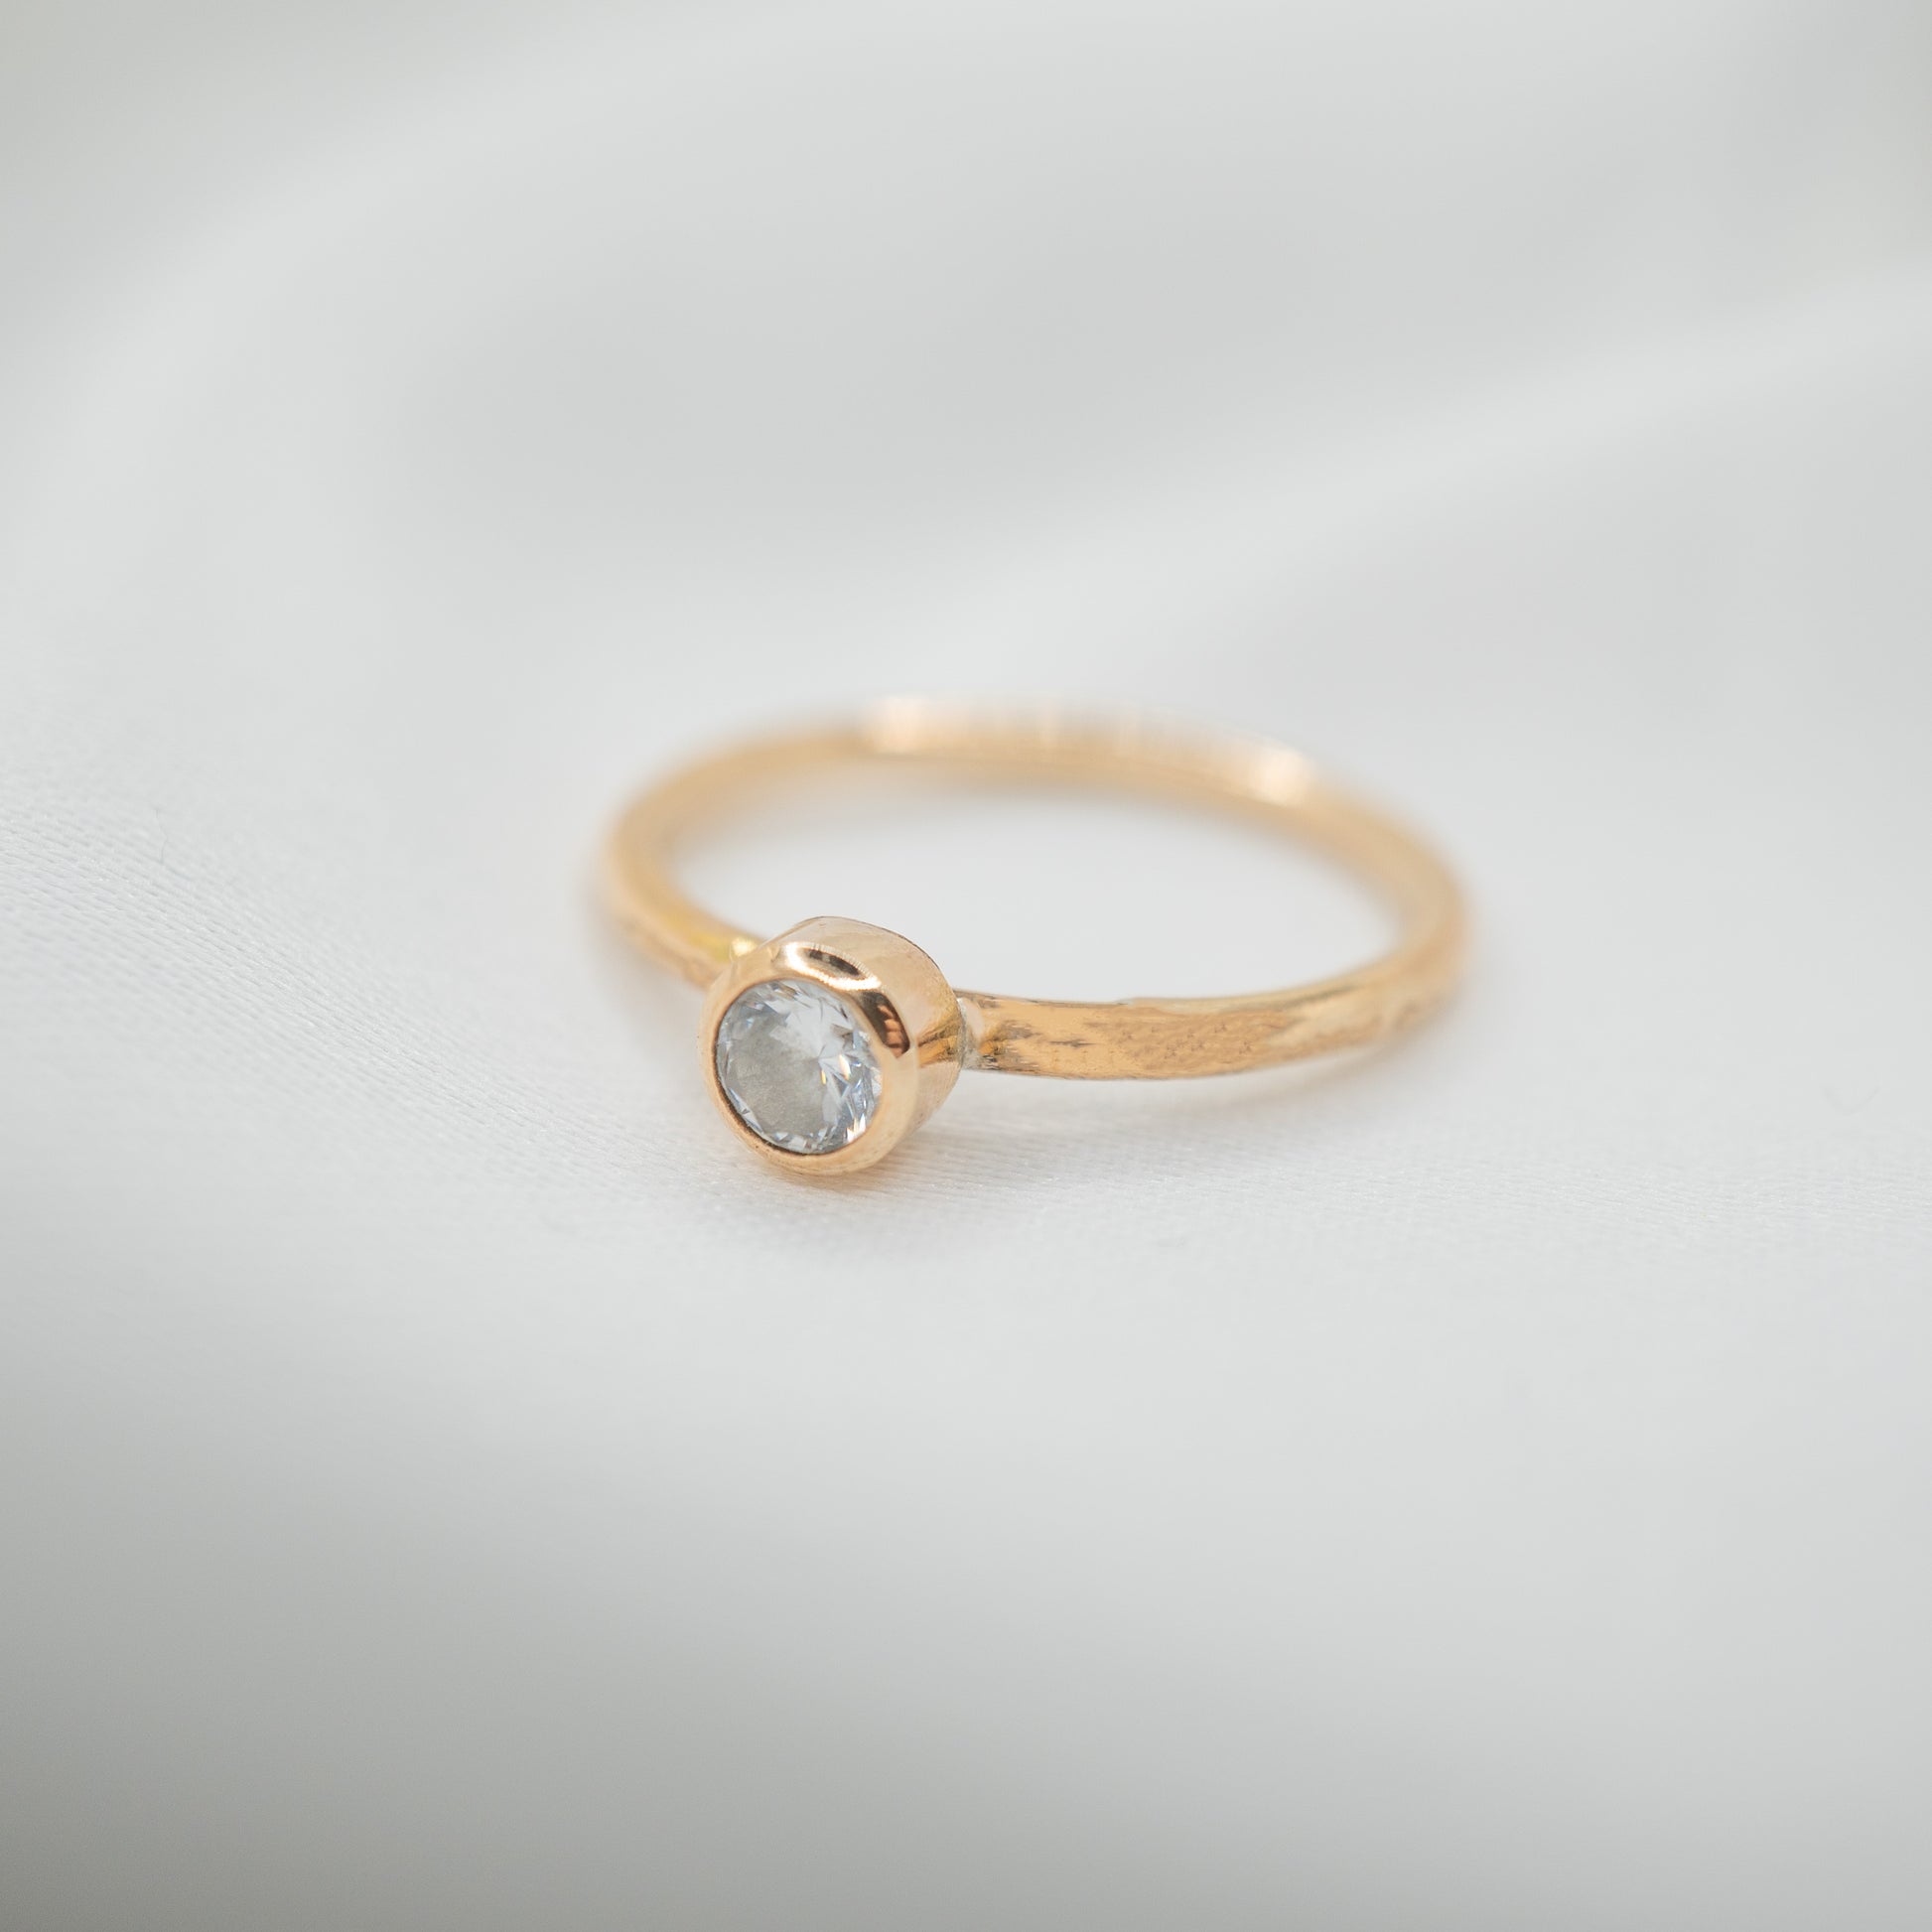 Gold Filled Cubic Zirconia Tube Ring - shot on white - left side view